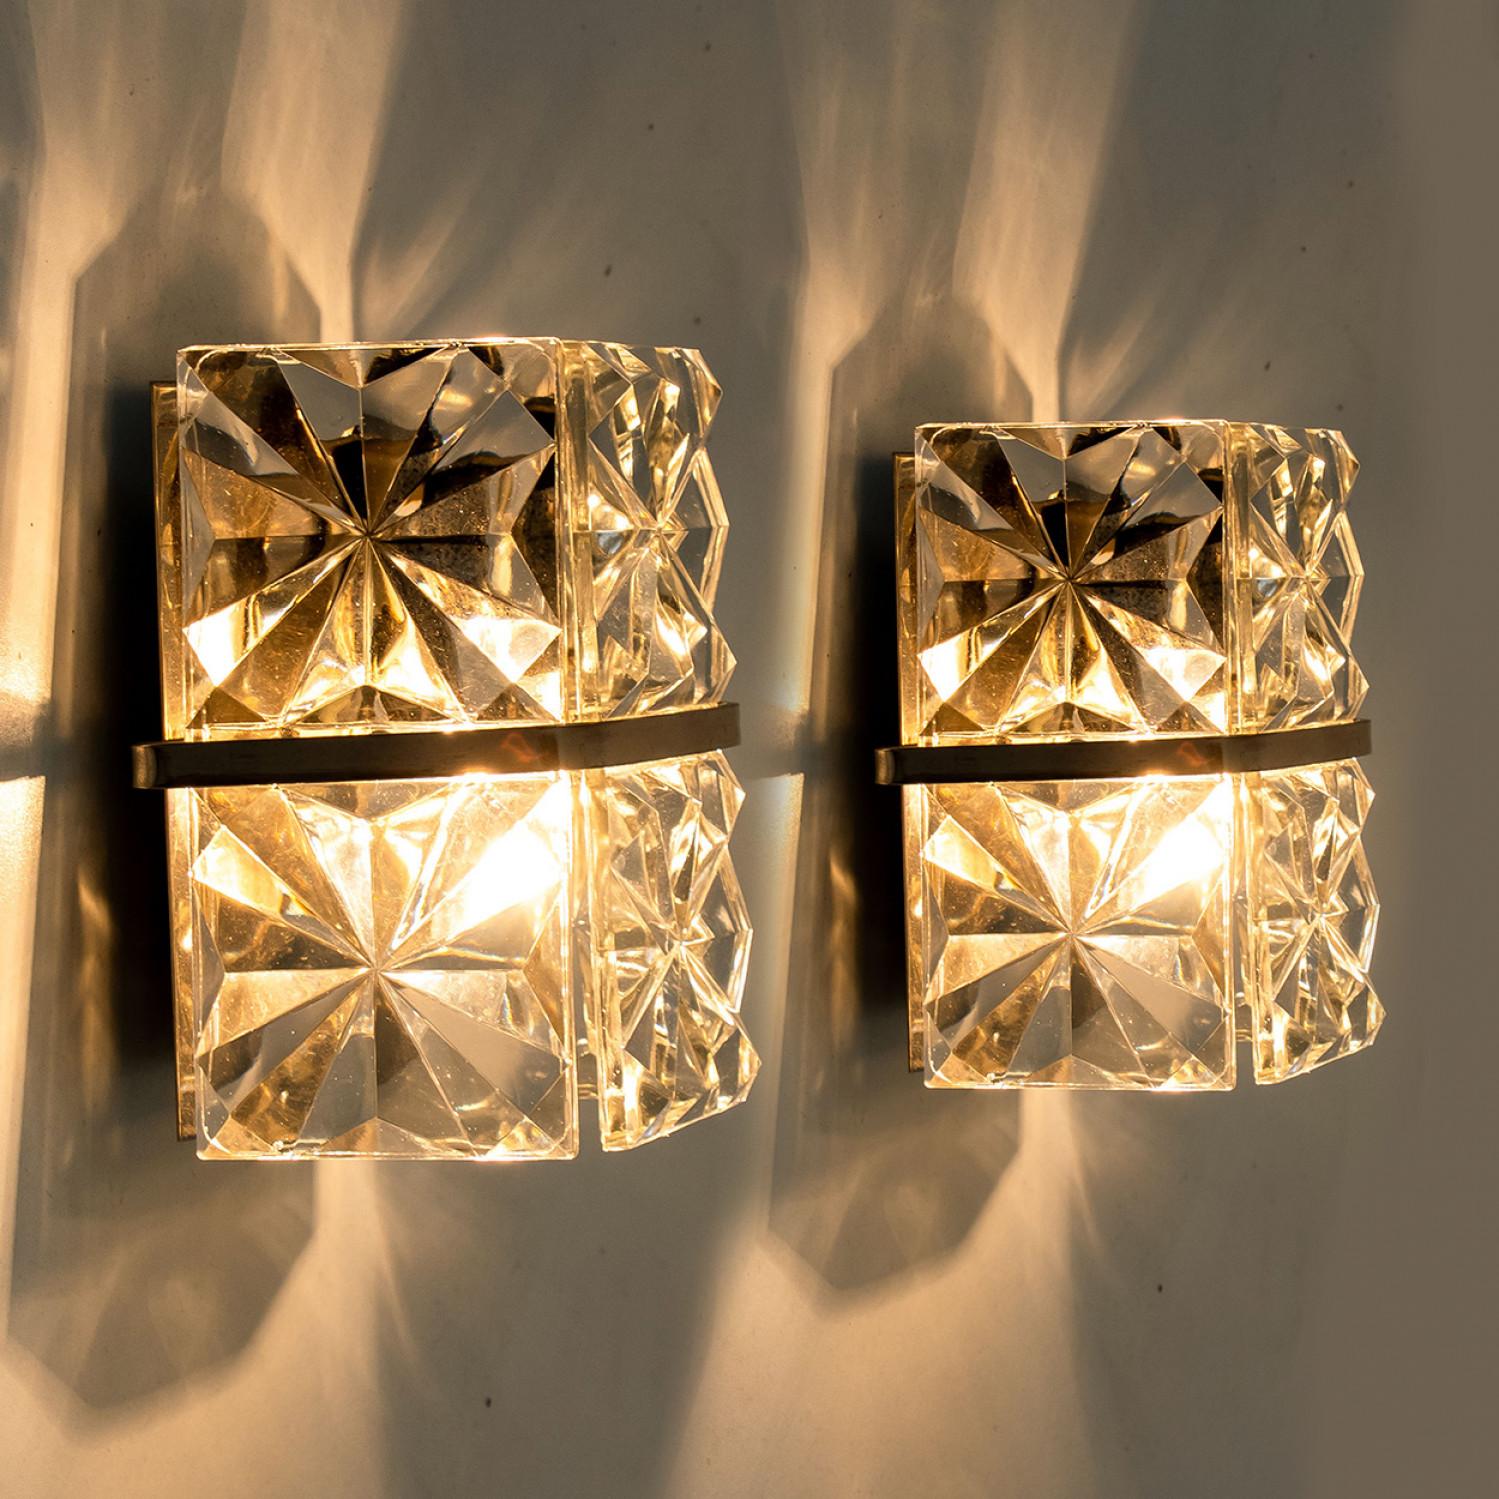 1 of the 2 Square Crystal and Silver Chrome Sconces by Kinkeldey, Germany, 1970 For Sale 1